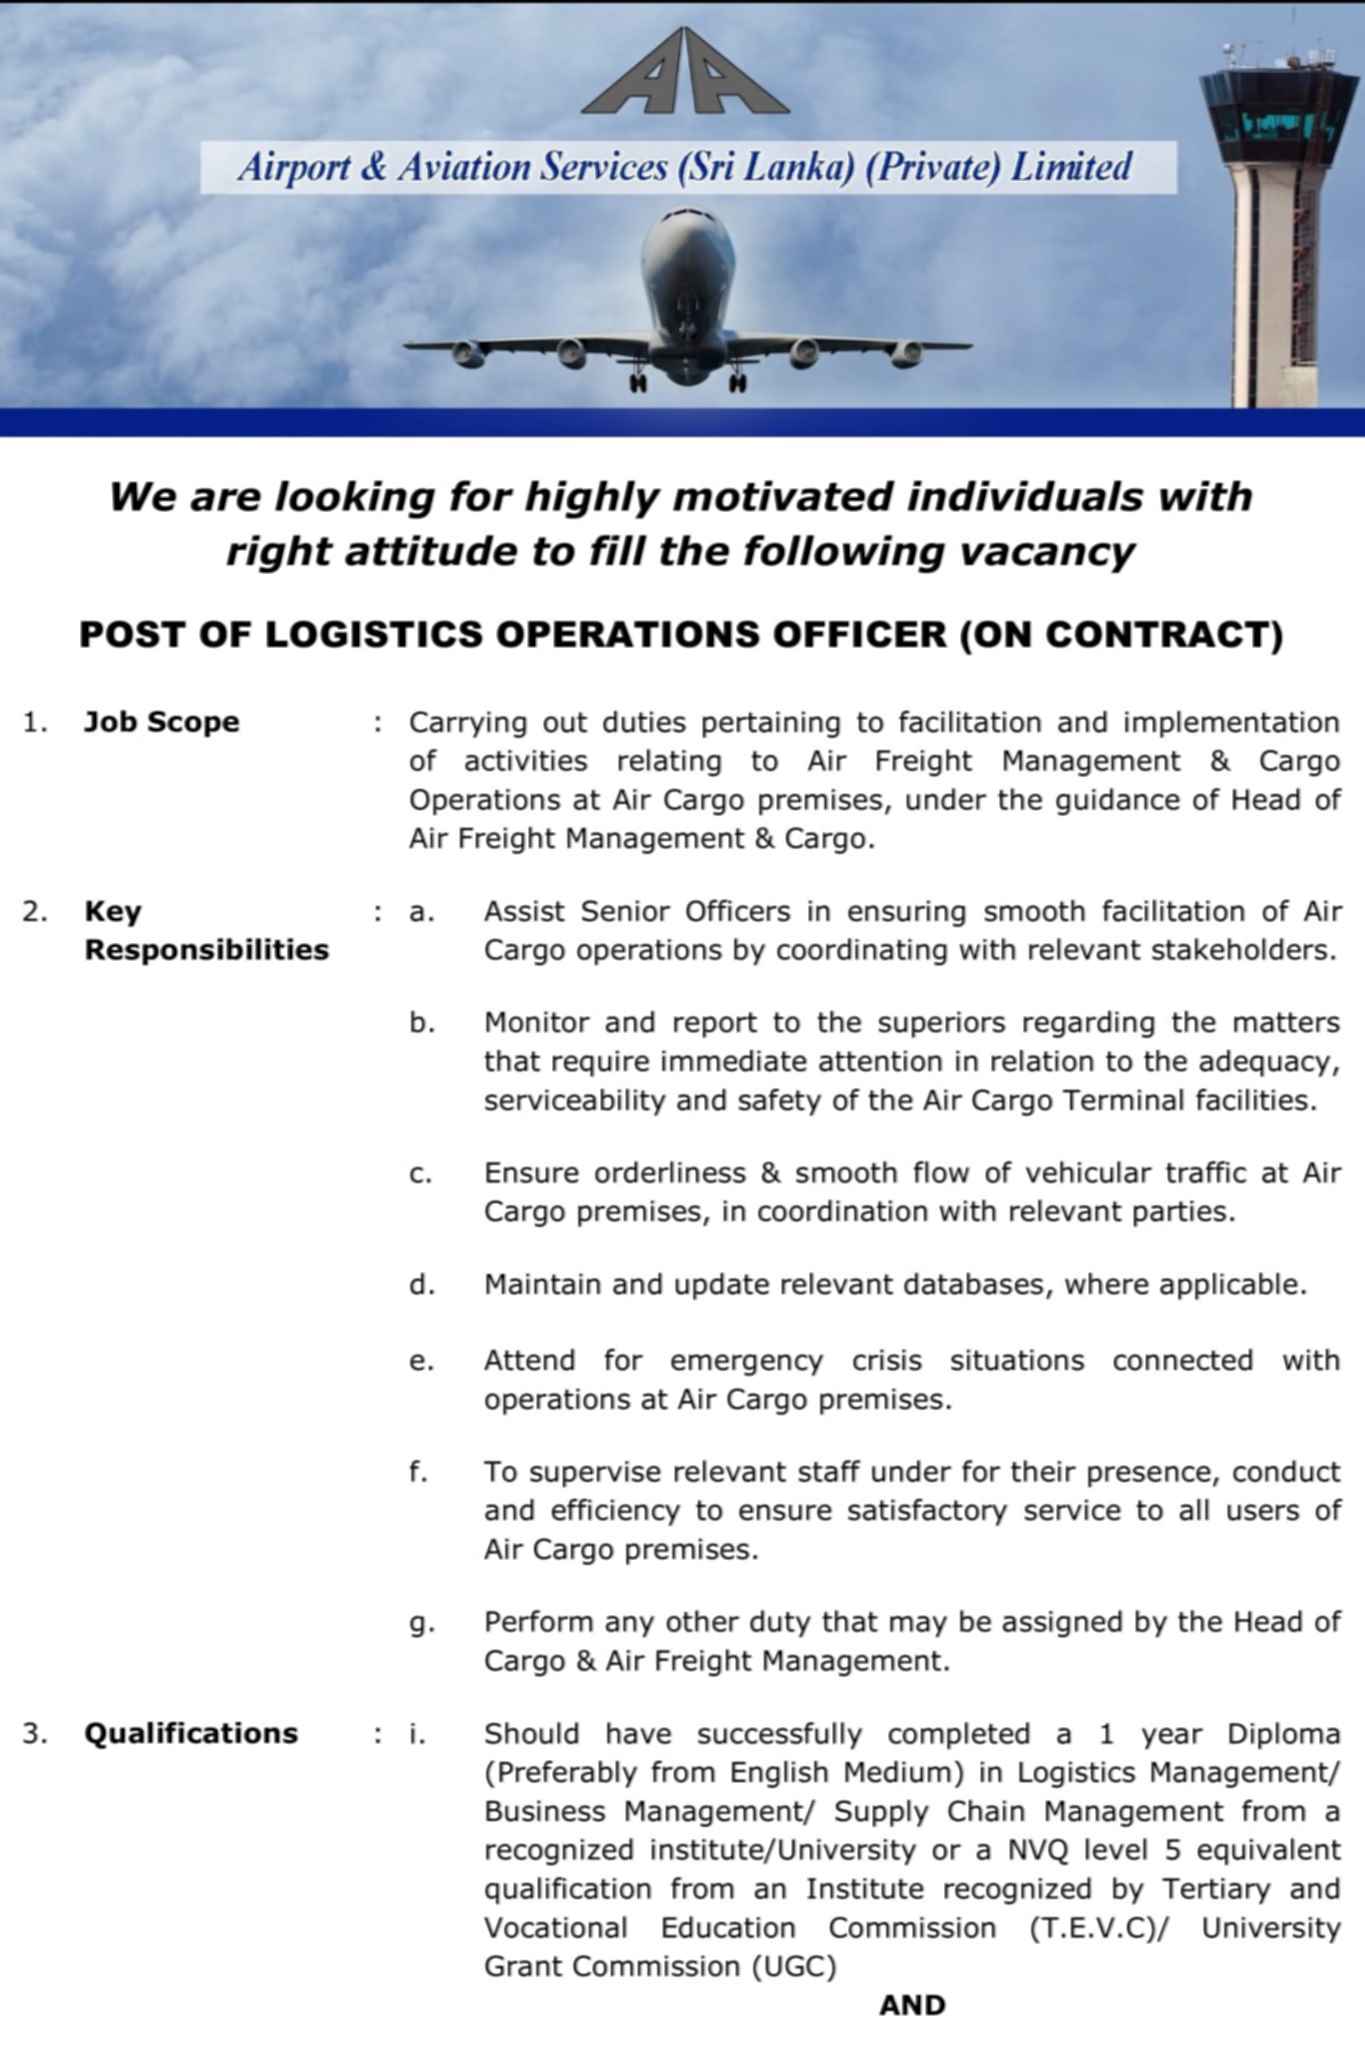 Logistics Operations Officer Jobs in Airport & Aviation Services Sri Lanka